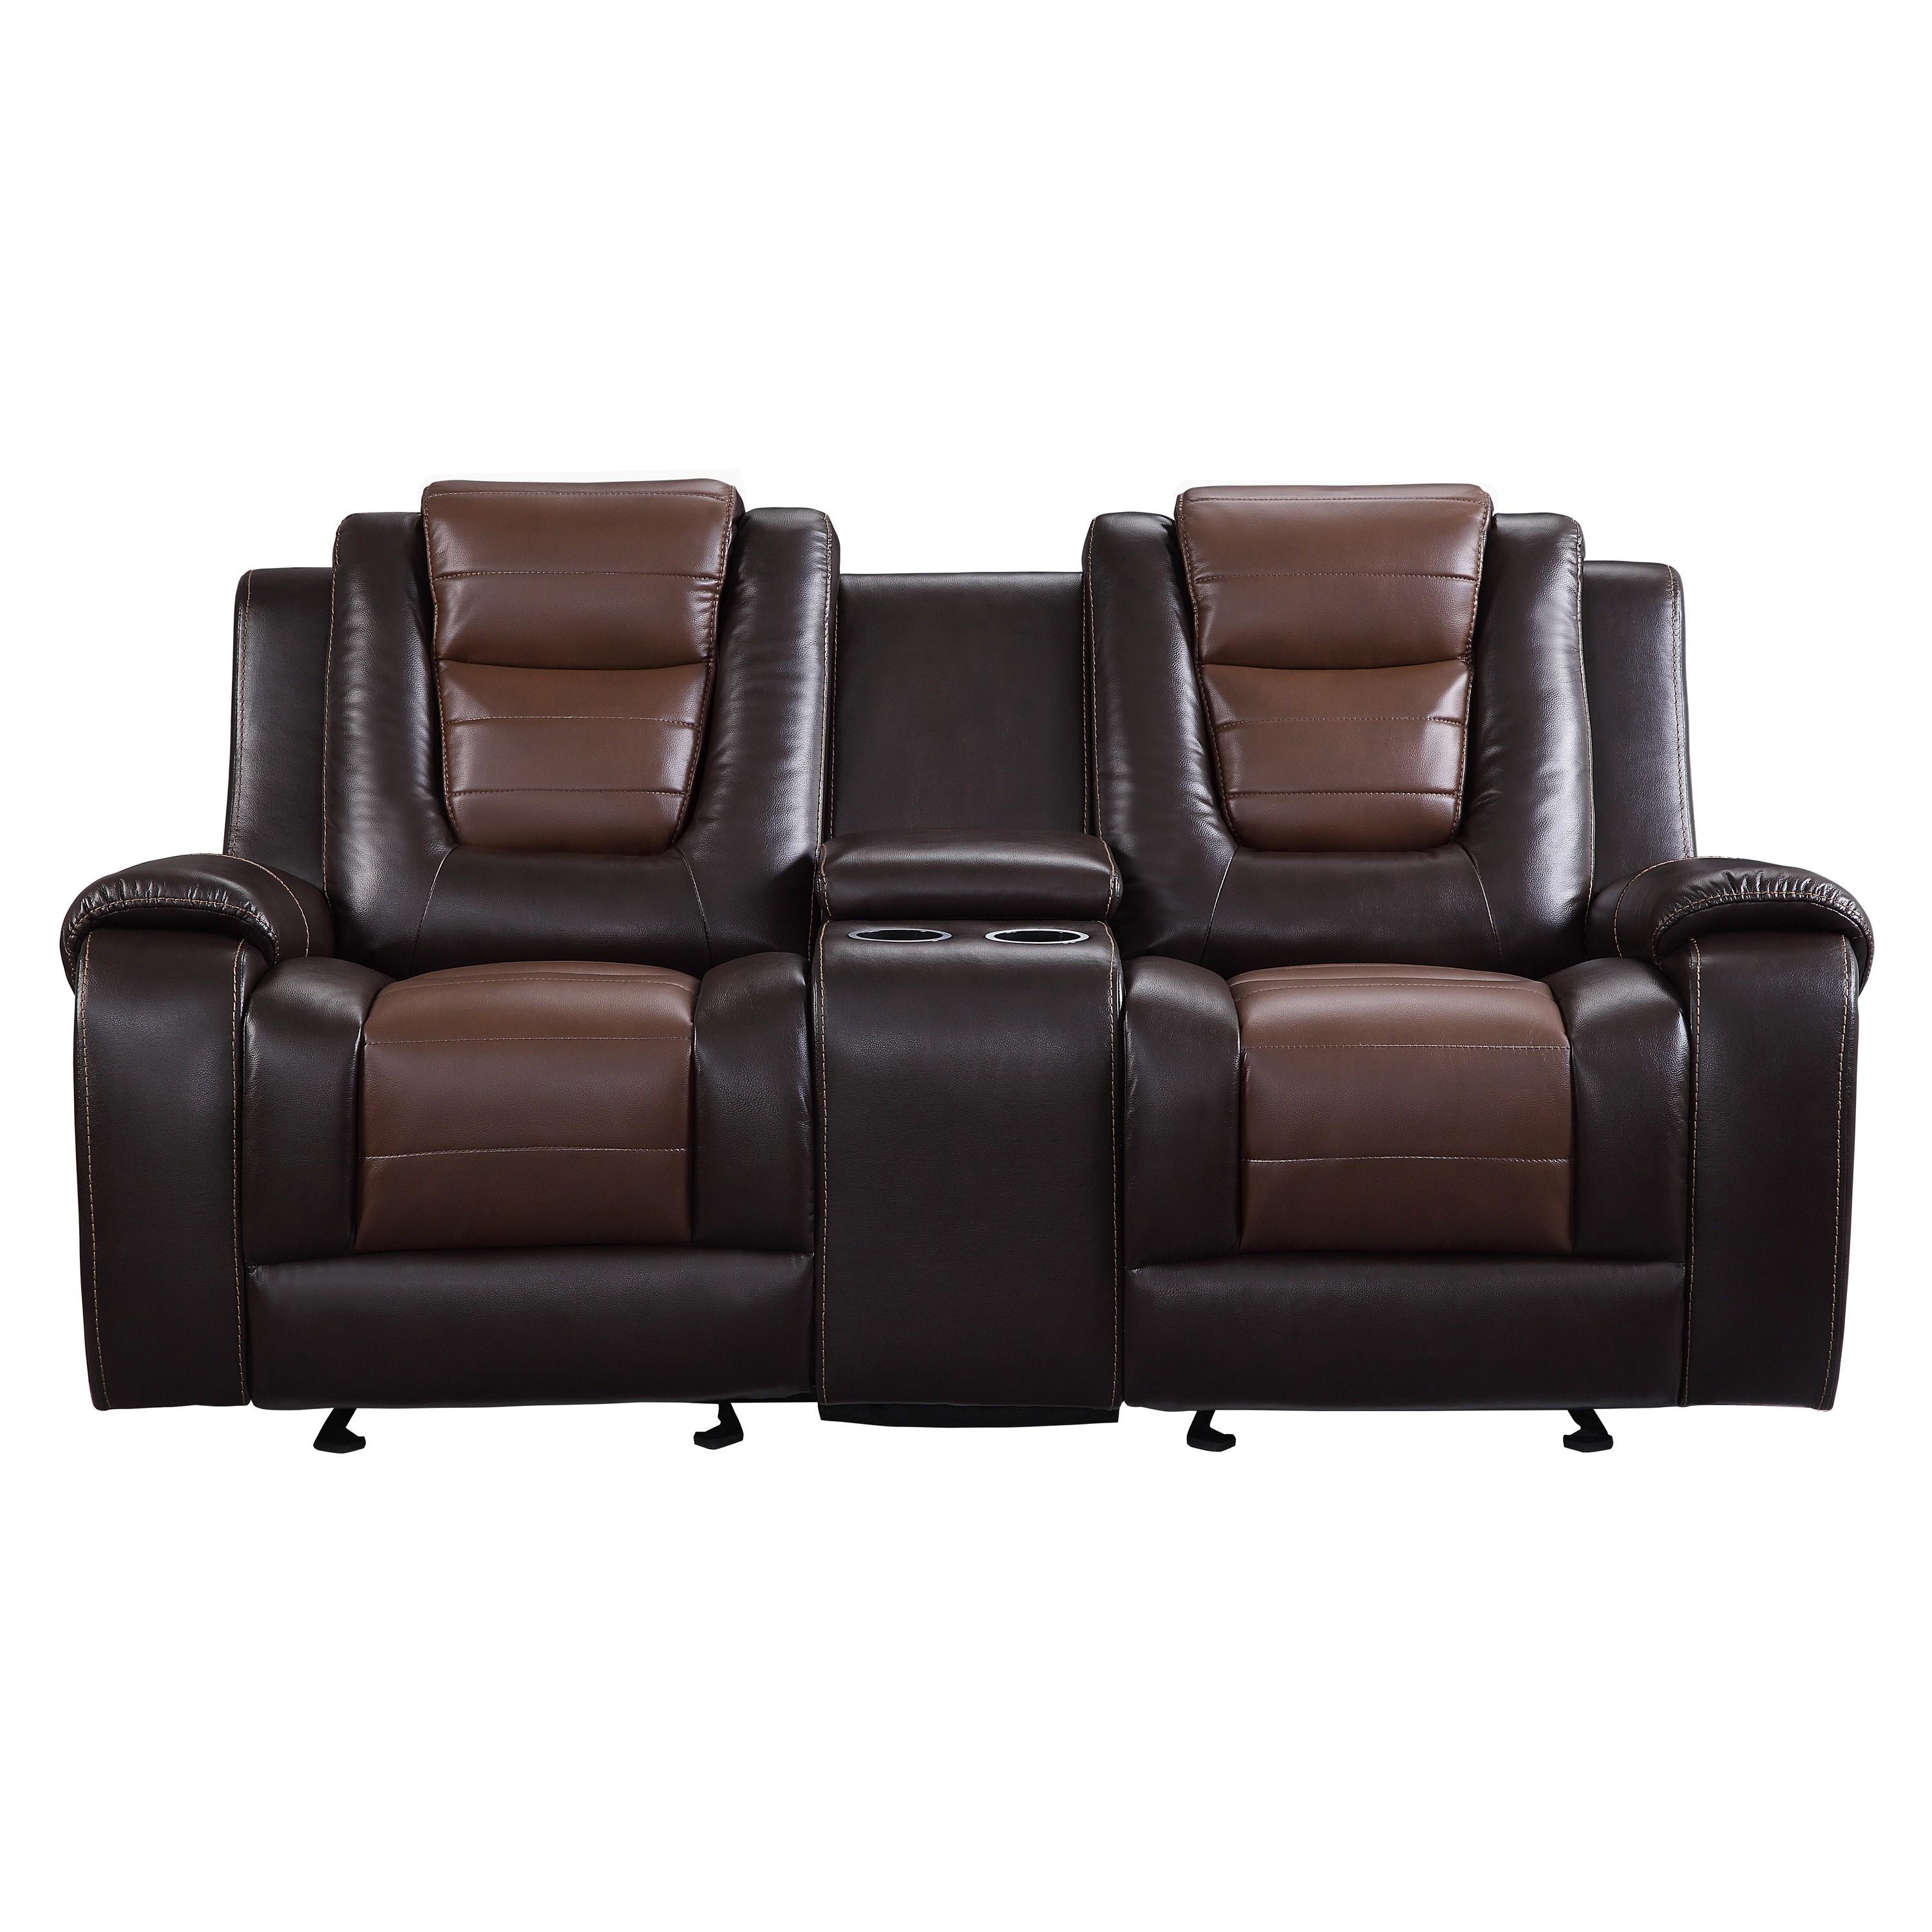 

    
Transitional Dark Brown & Light Brown Faux Leather Reclining Loveseat Homelegance 9470BR-2 Briscoe
